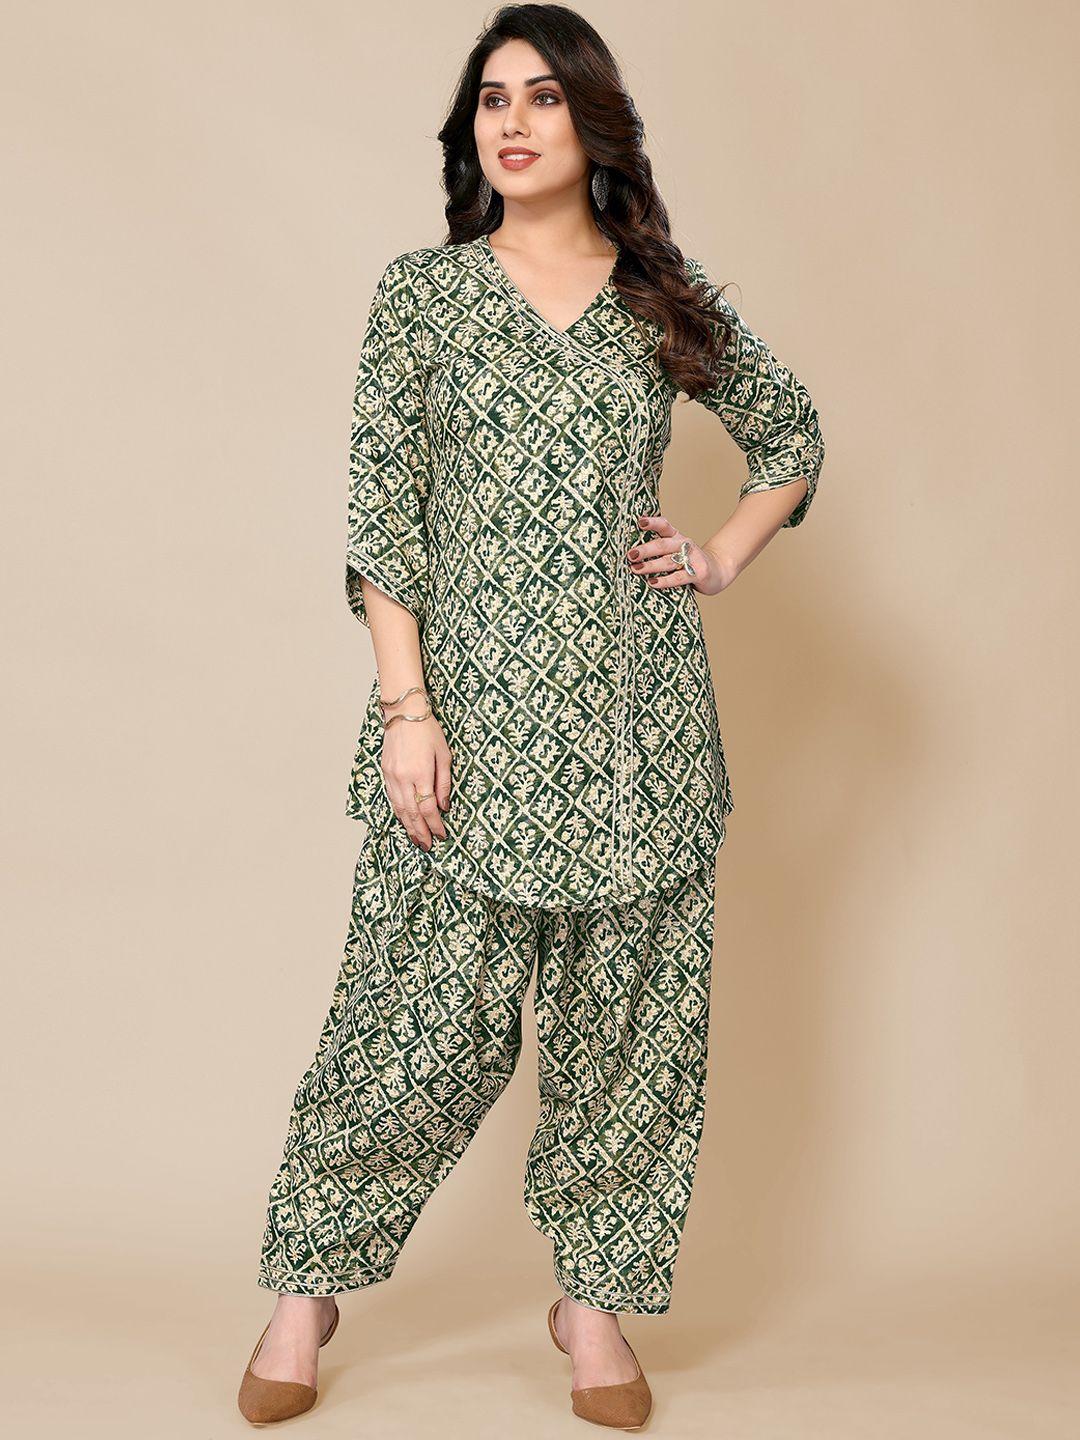 pyari - a style for every story floral printed straight kurta with salwar